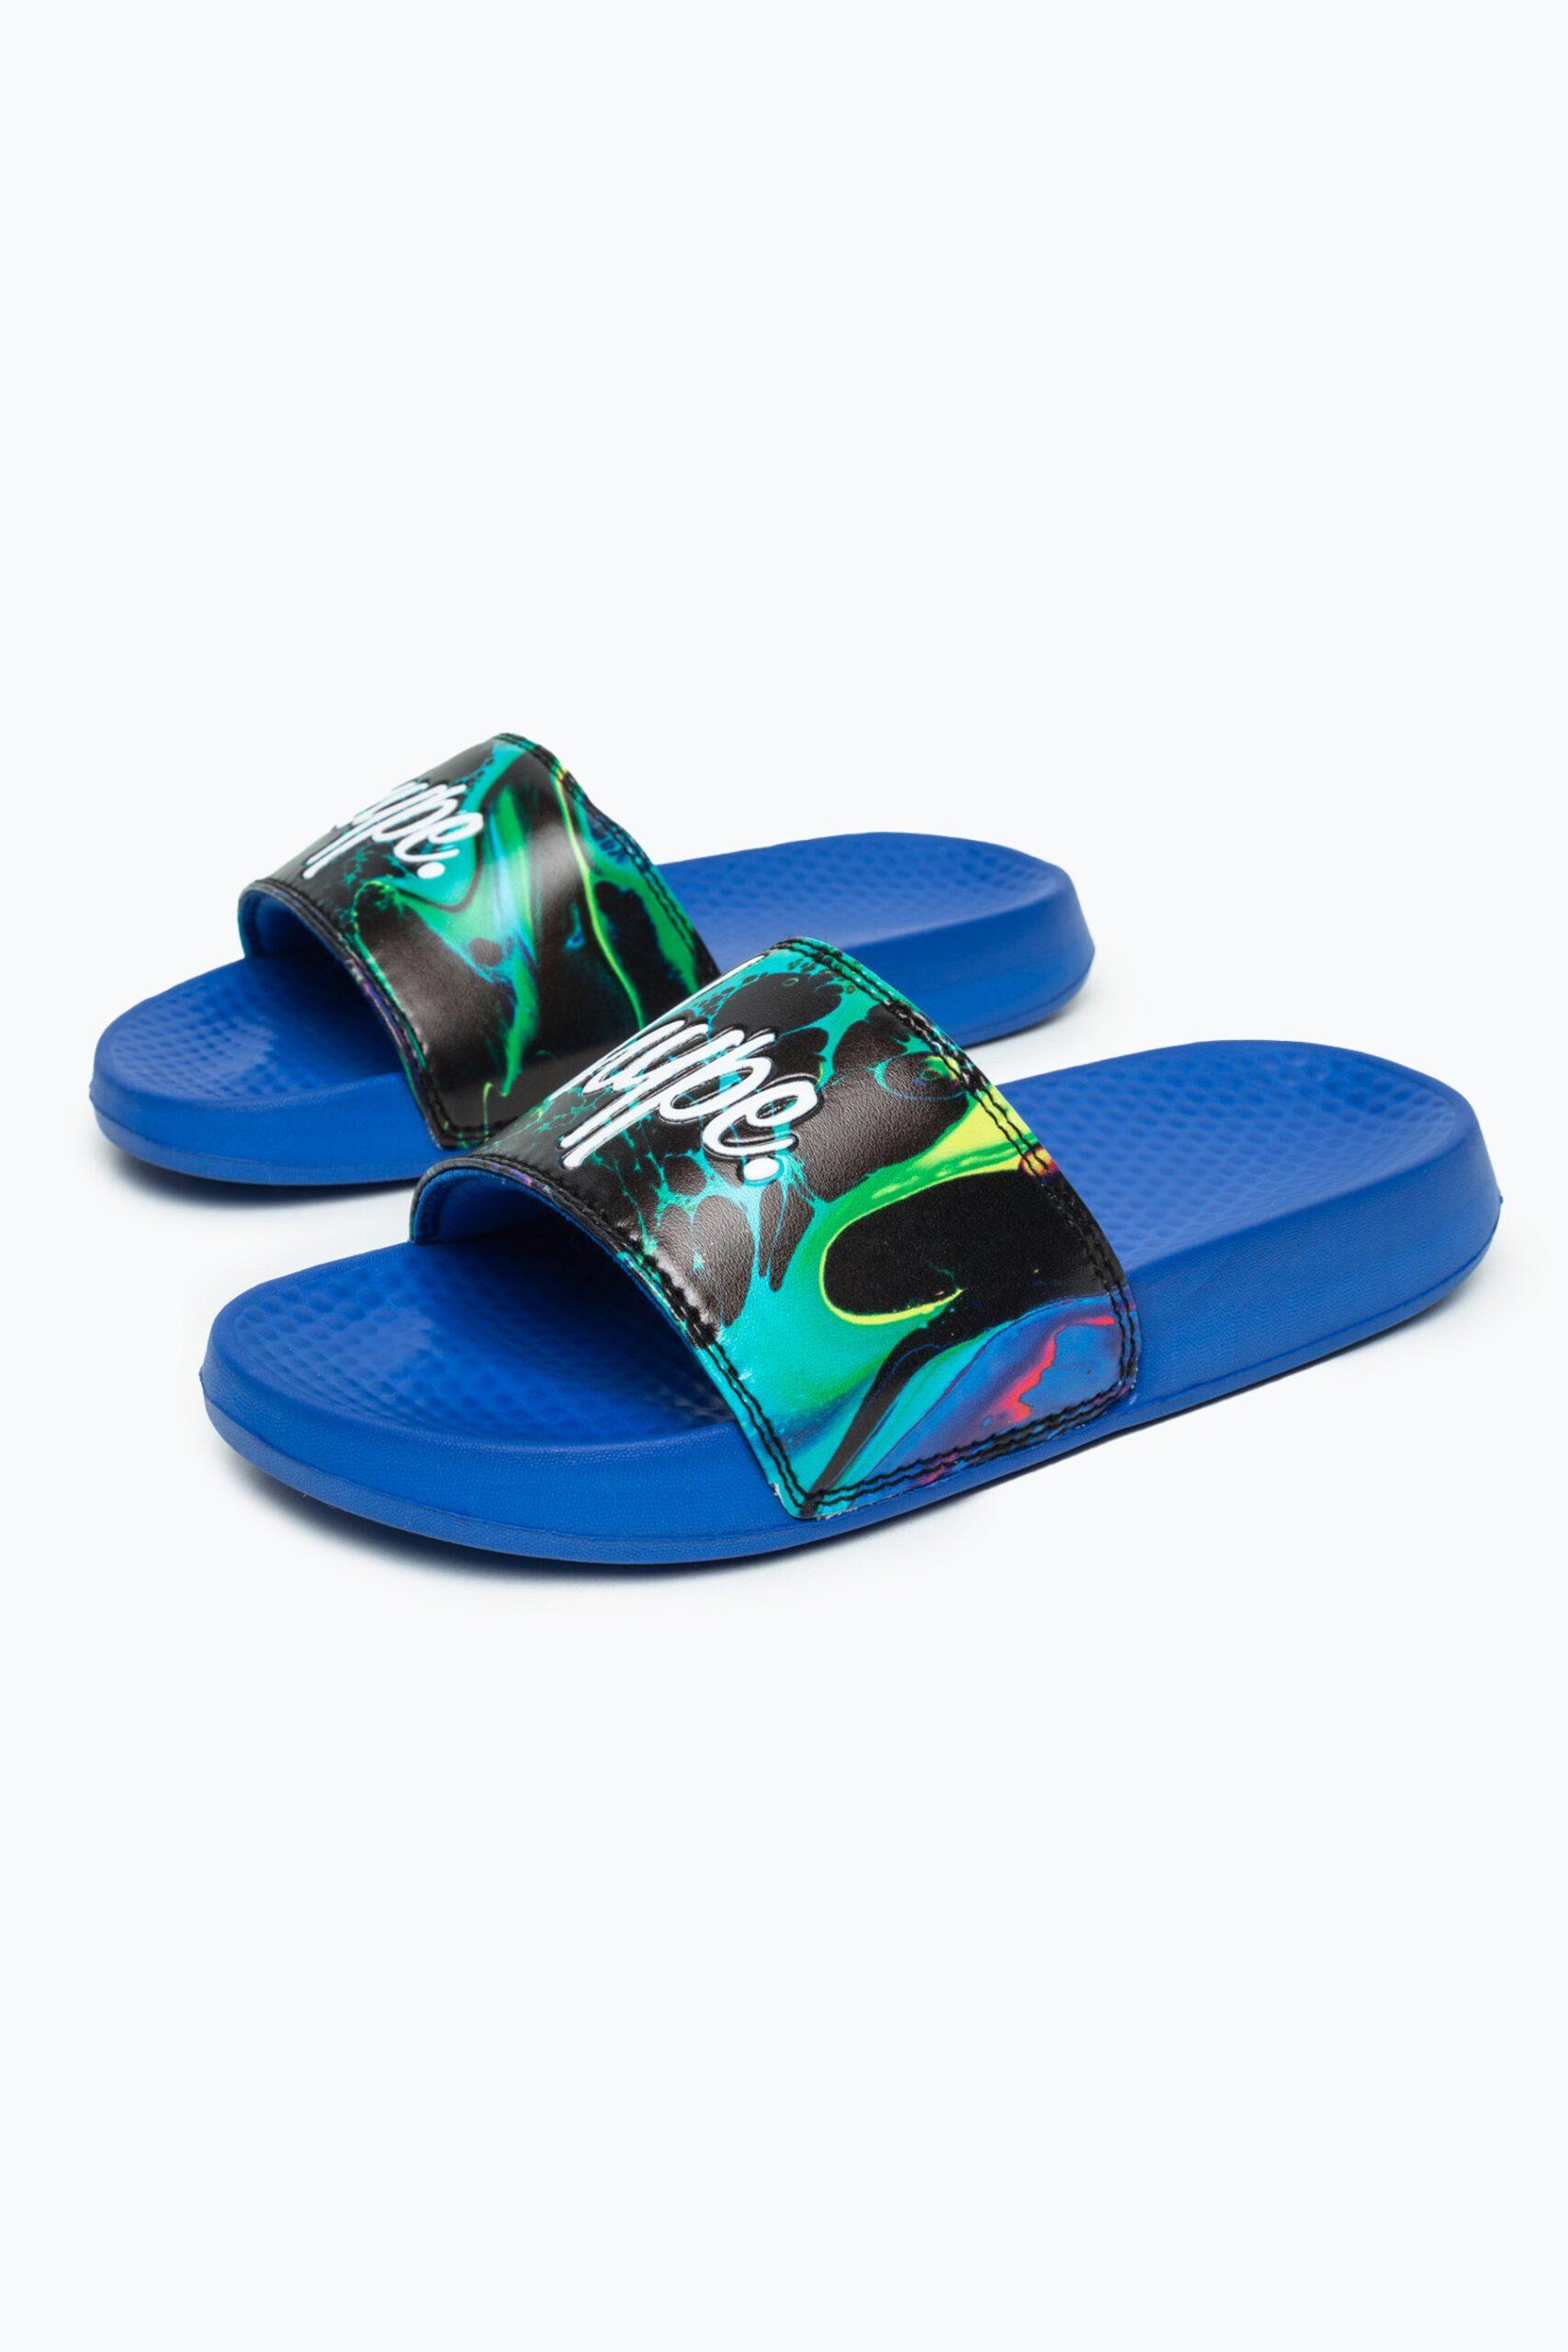 Hype multi coloured blue marble sliders side view